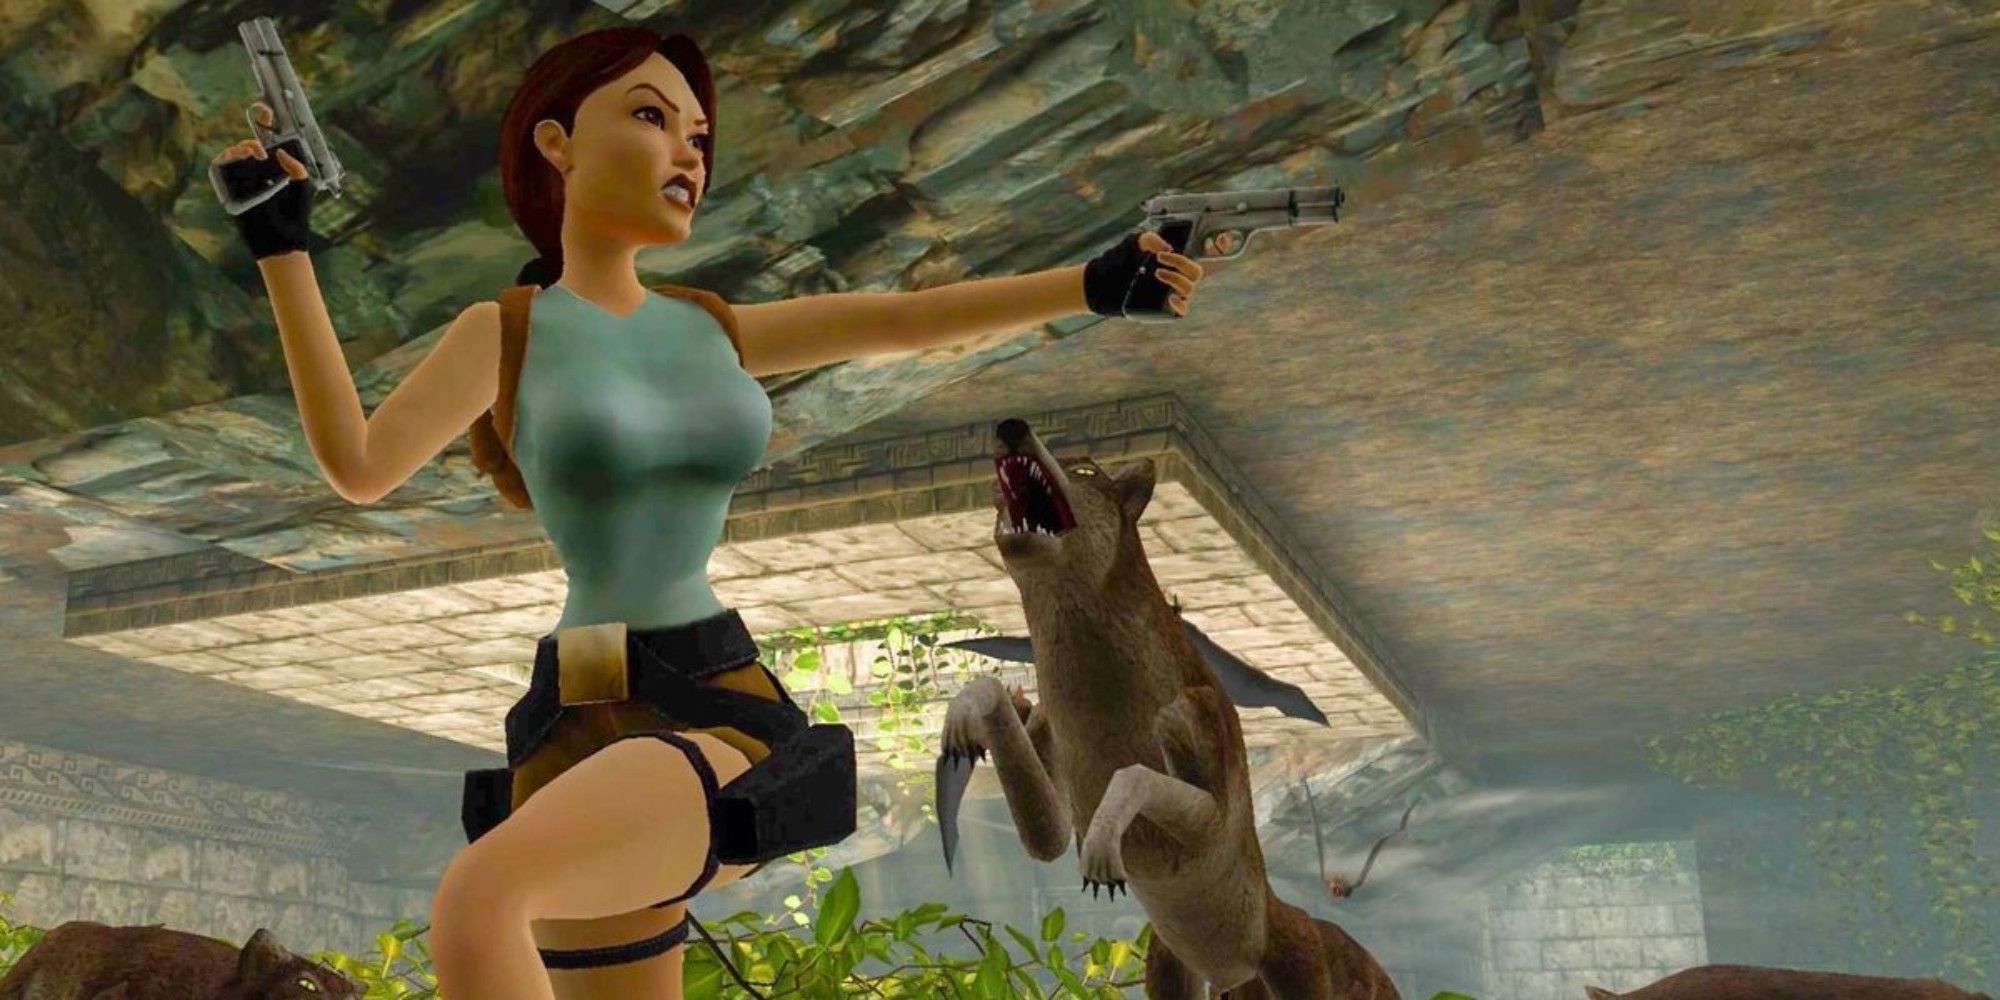 Lara croft fighting with wolves with dual pistols